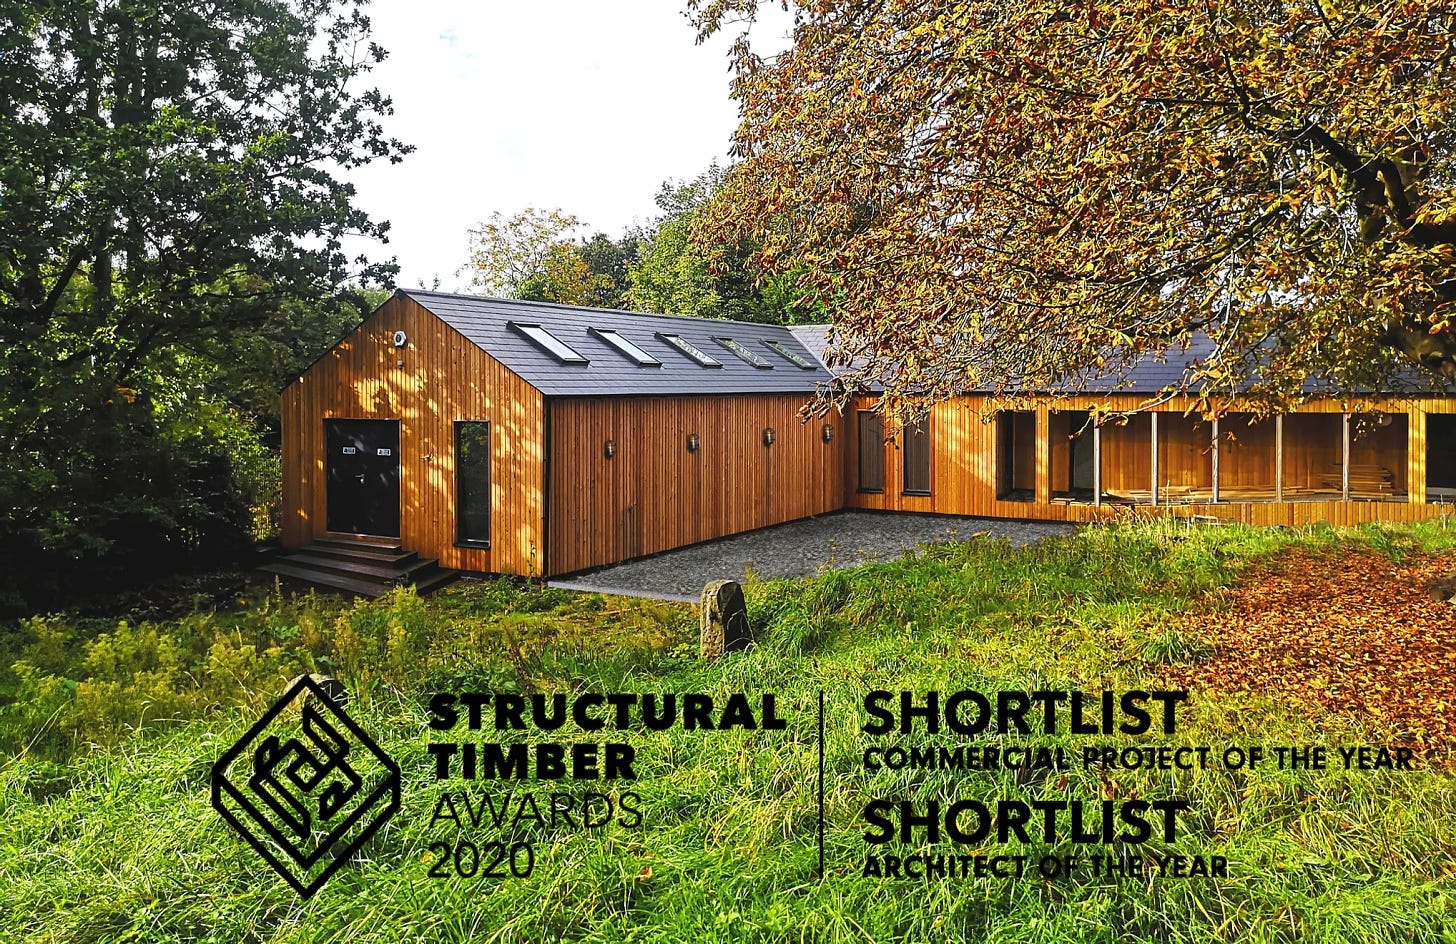 Finished Scouts Hut built using WikiHouse. Text underneath reads: Shortlist Structural Timber Awards 2020